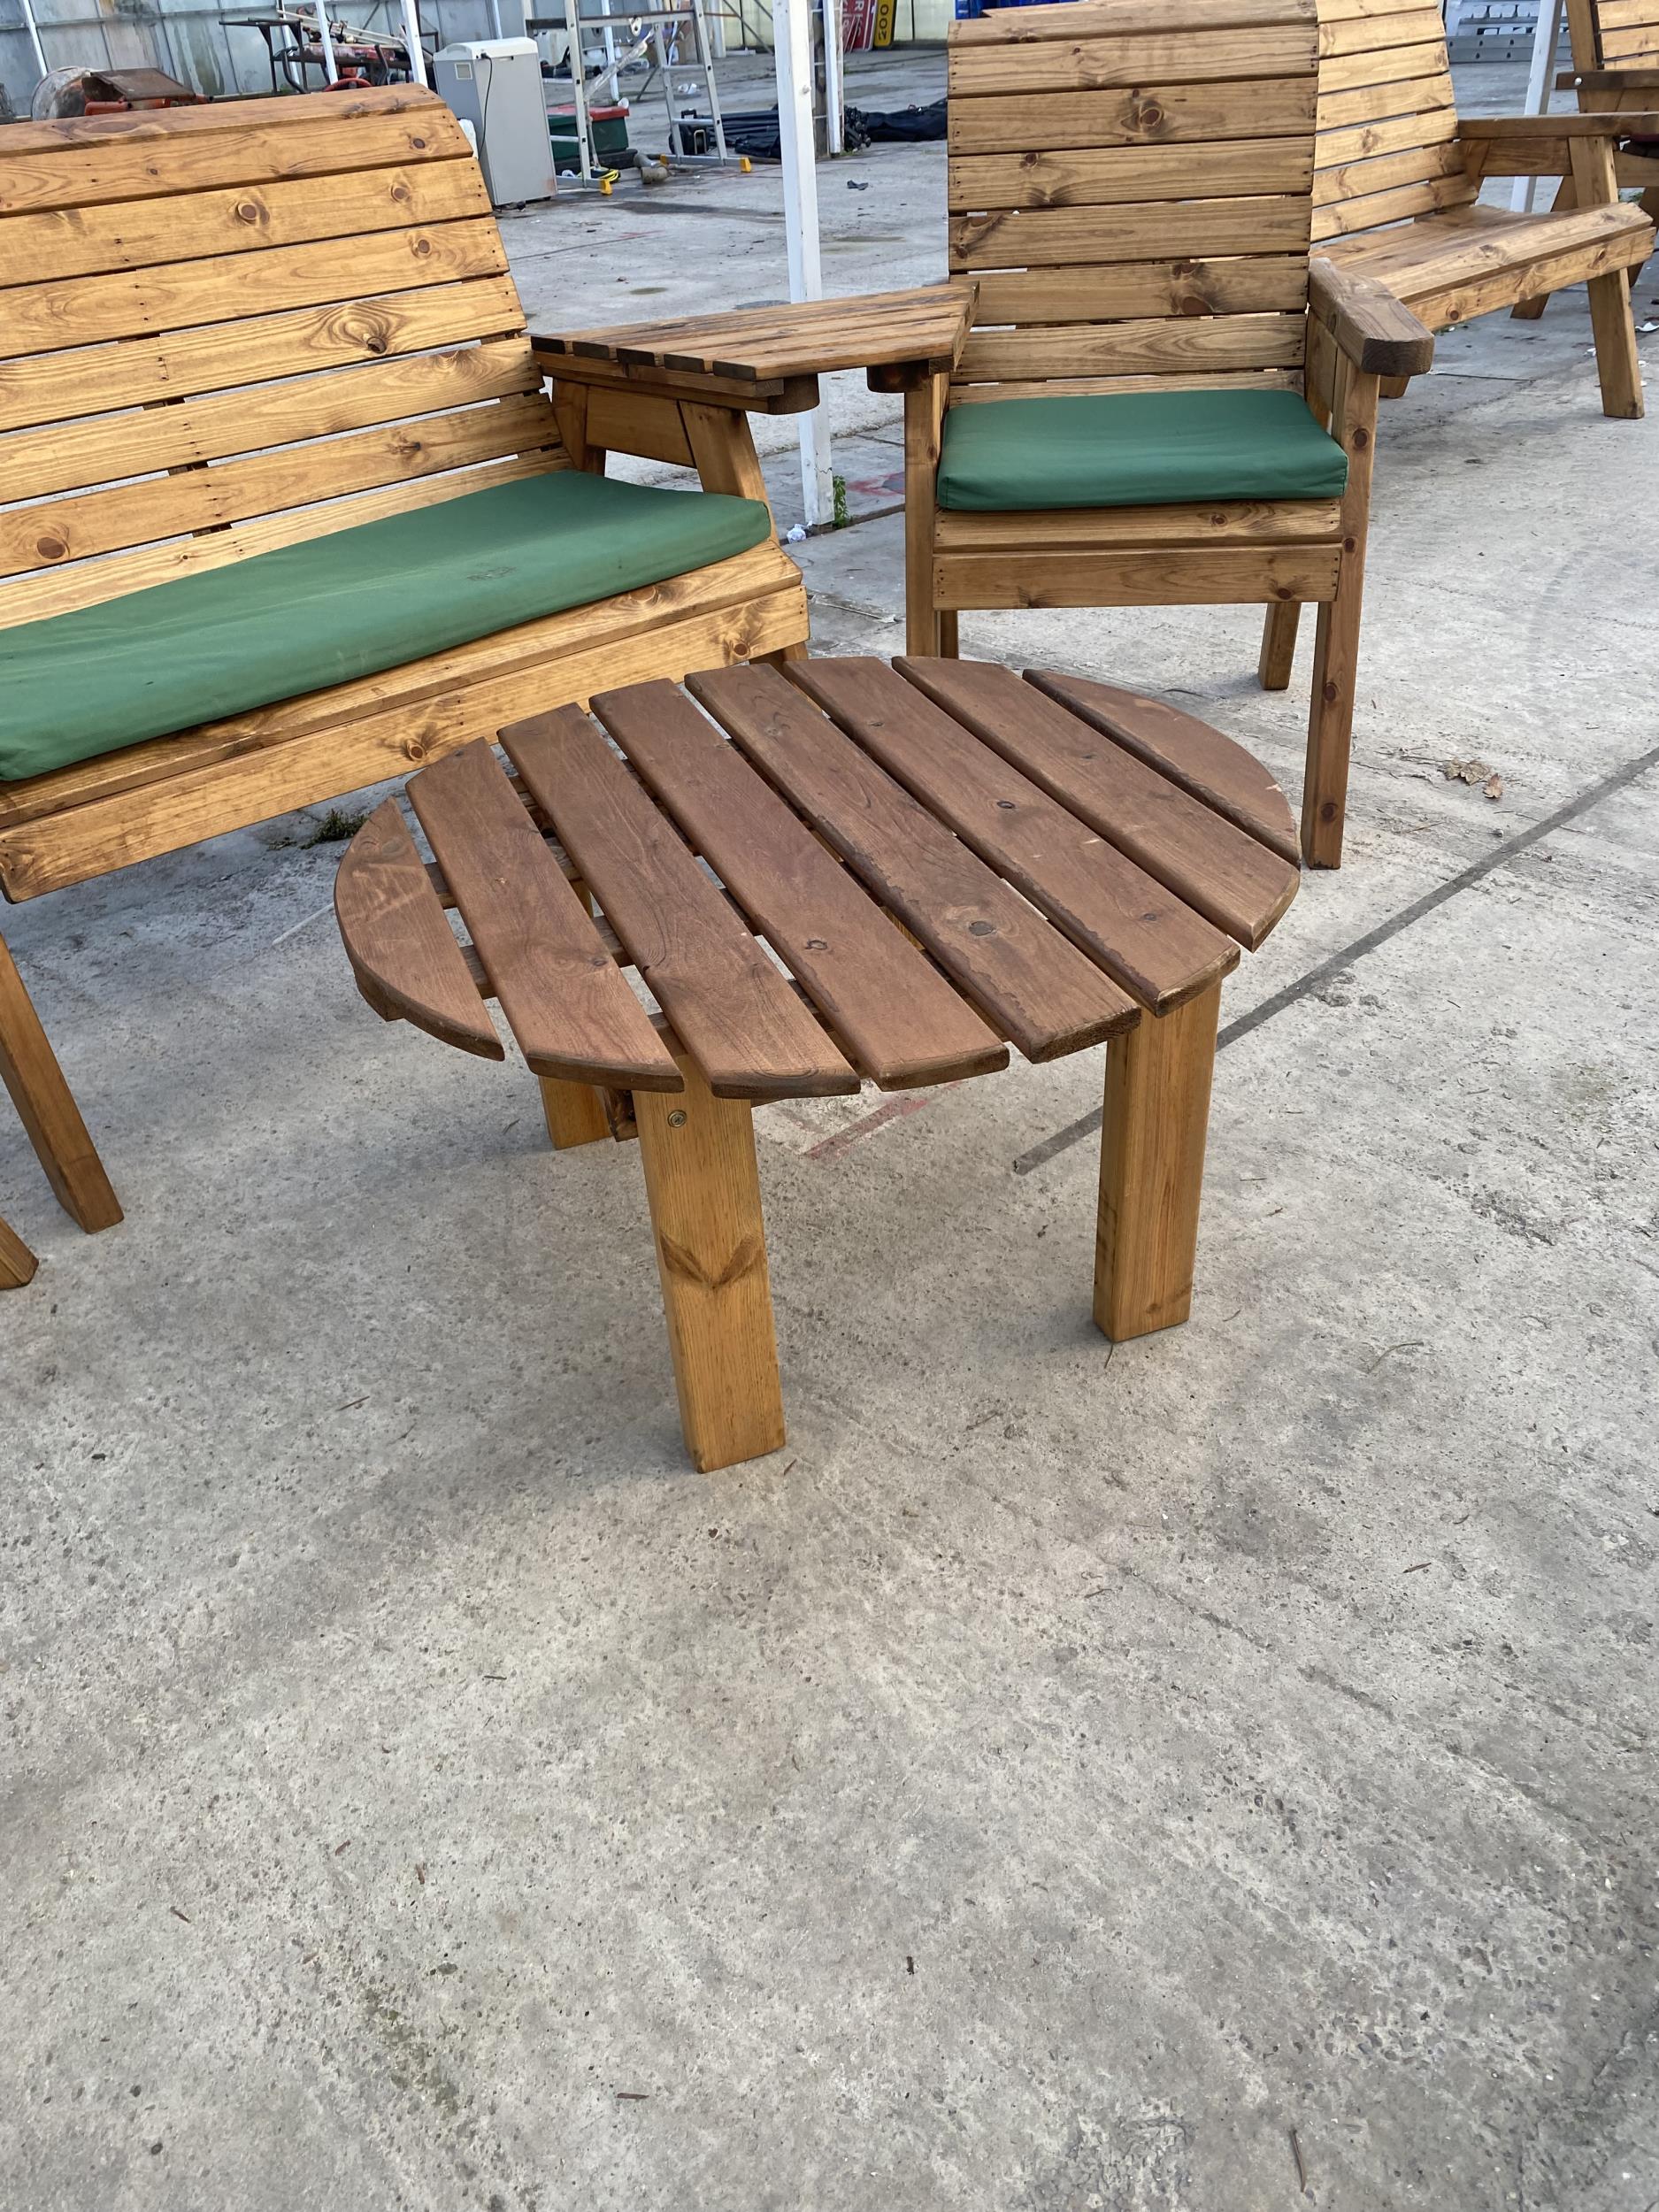 AN AS NEW EX DISPLAY CHARLES TAYLOR PATIO SET COMPRISING OF A BENCH, TWO CHAIRS, A ROUND COFFEE - Bild 4 aus 5